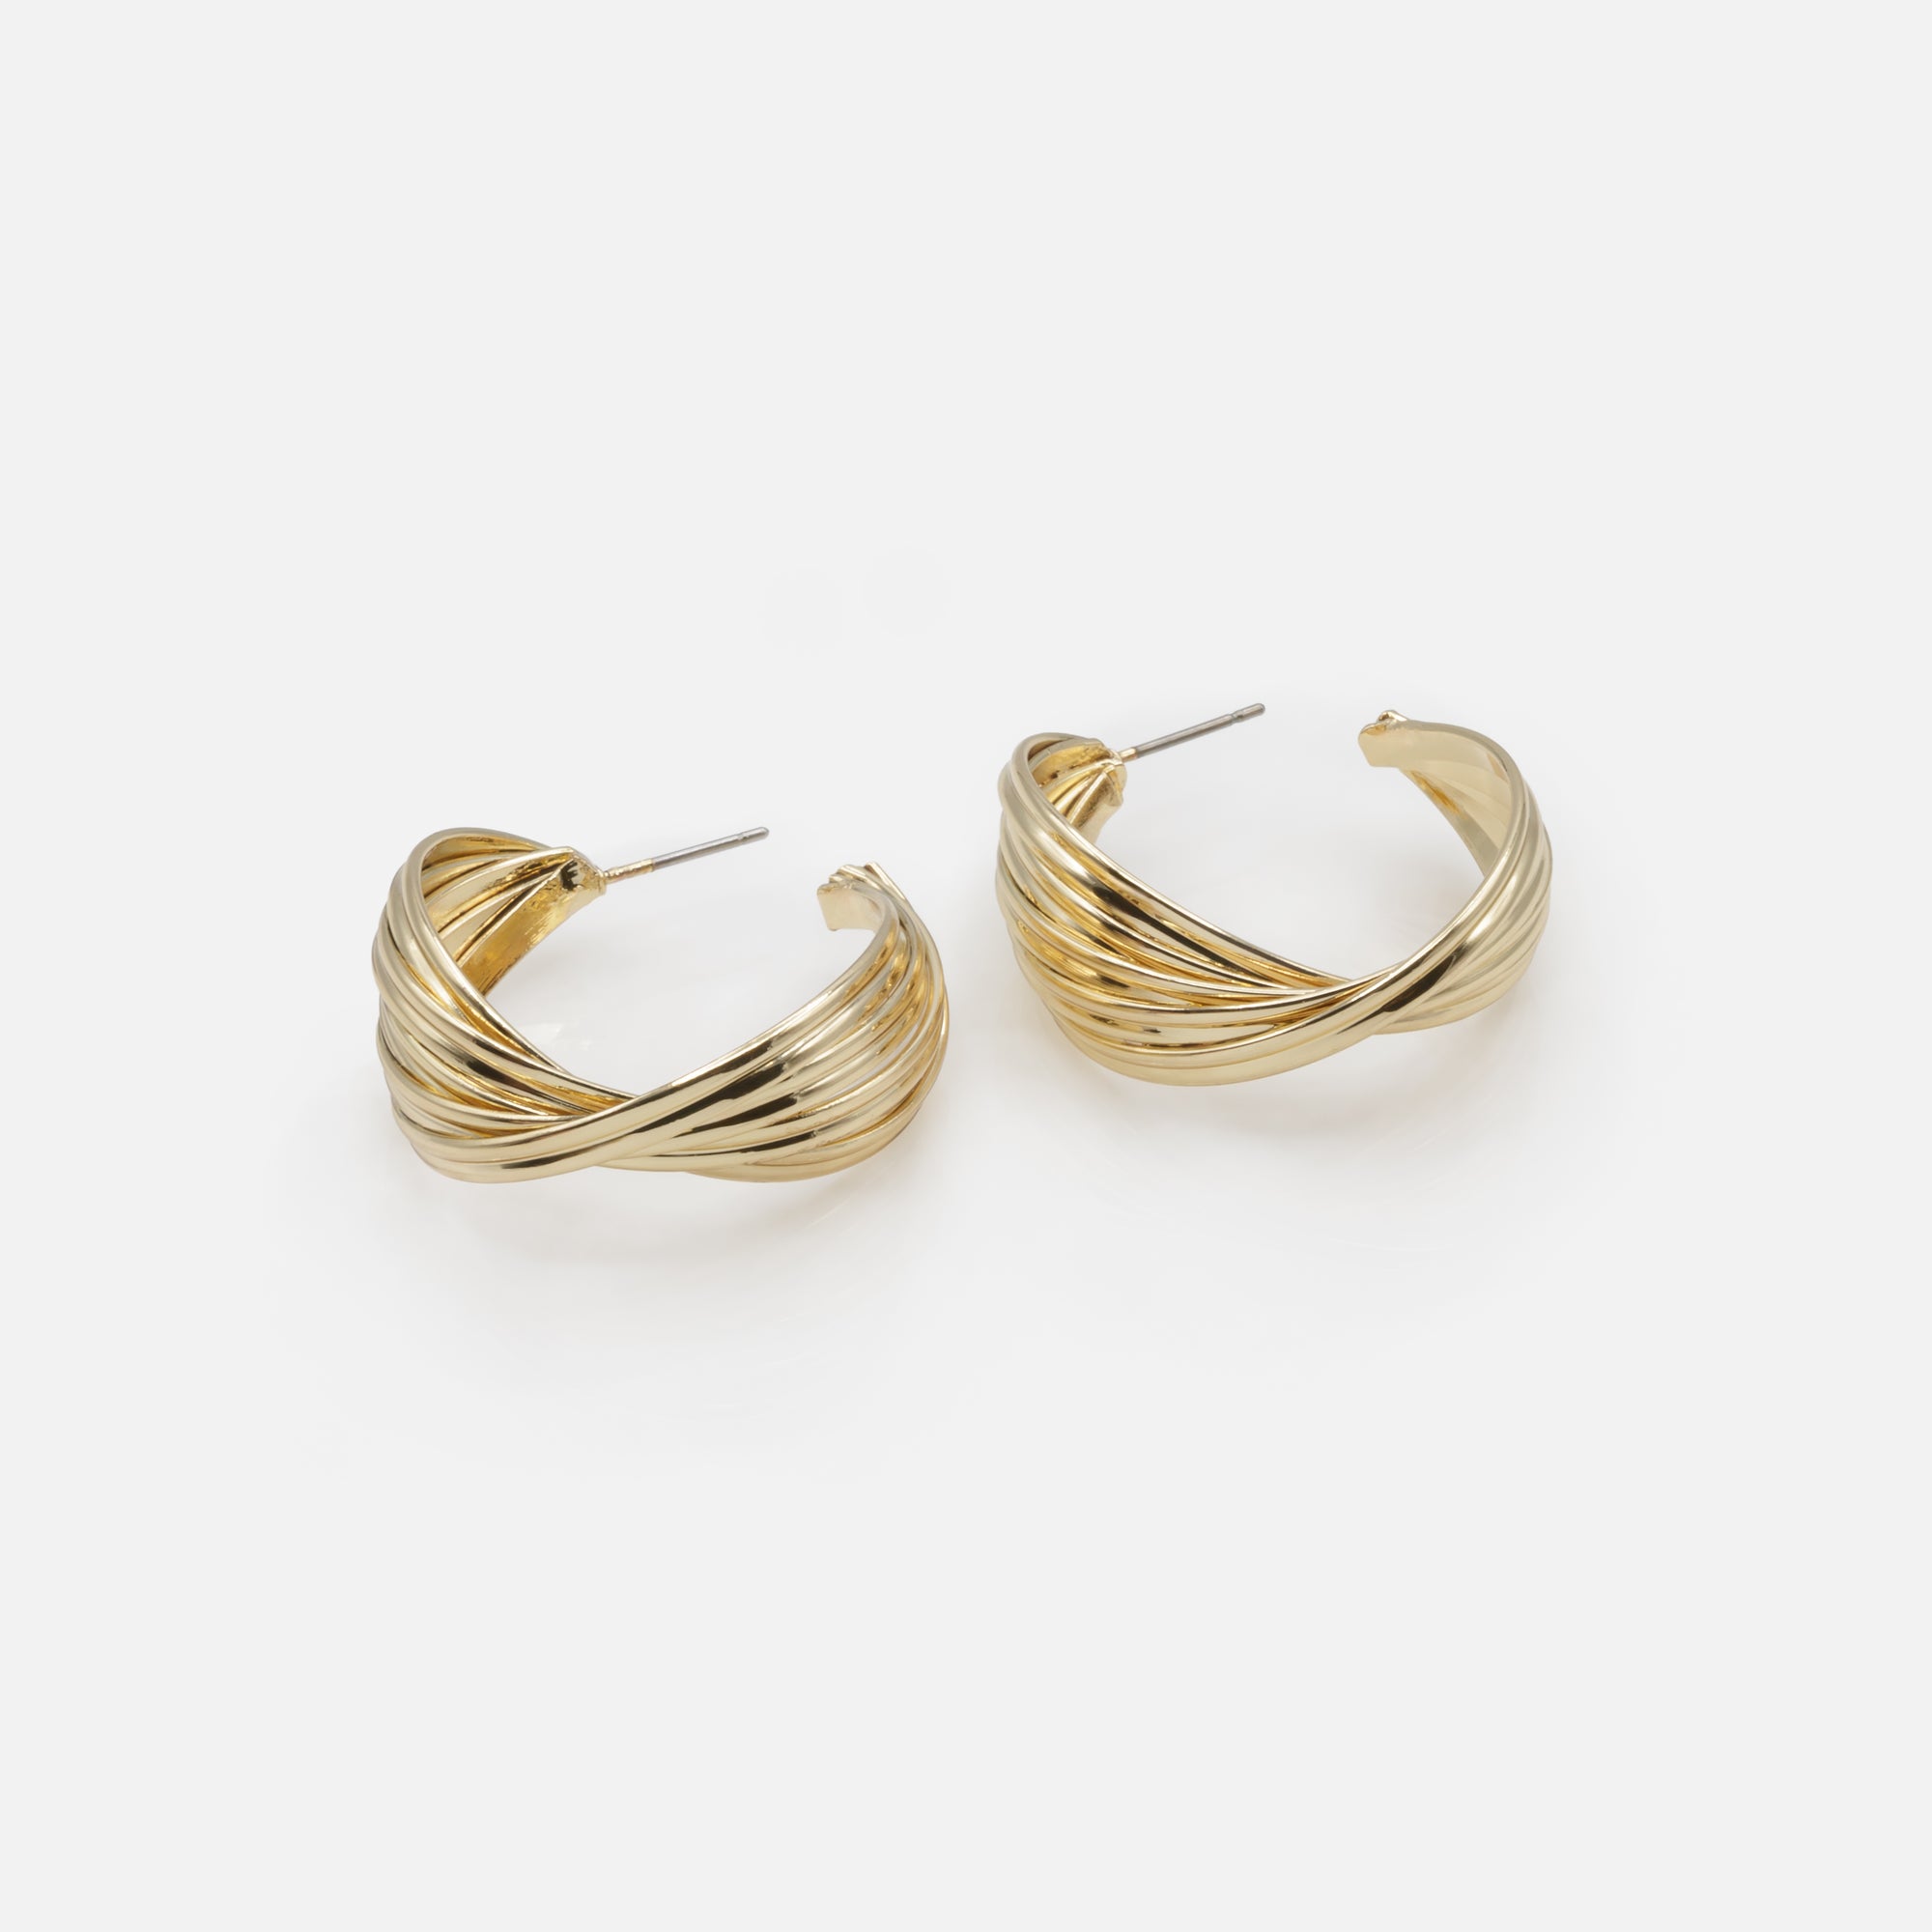 Duo of heart earrings and intertwined gold rings